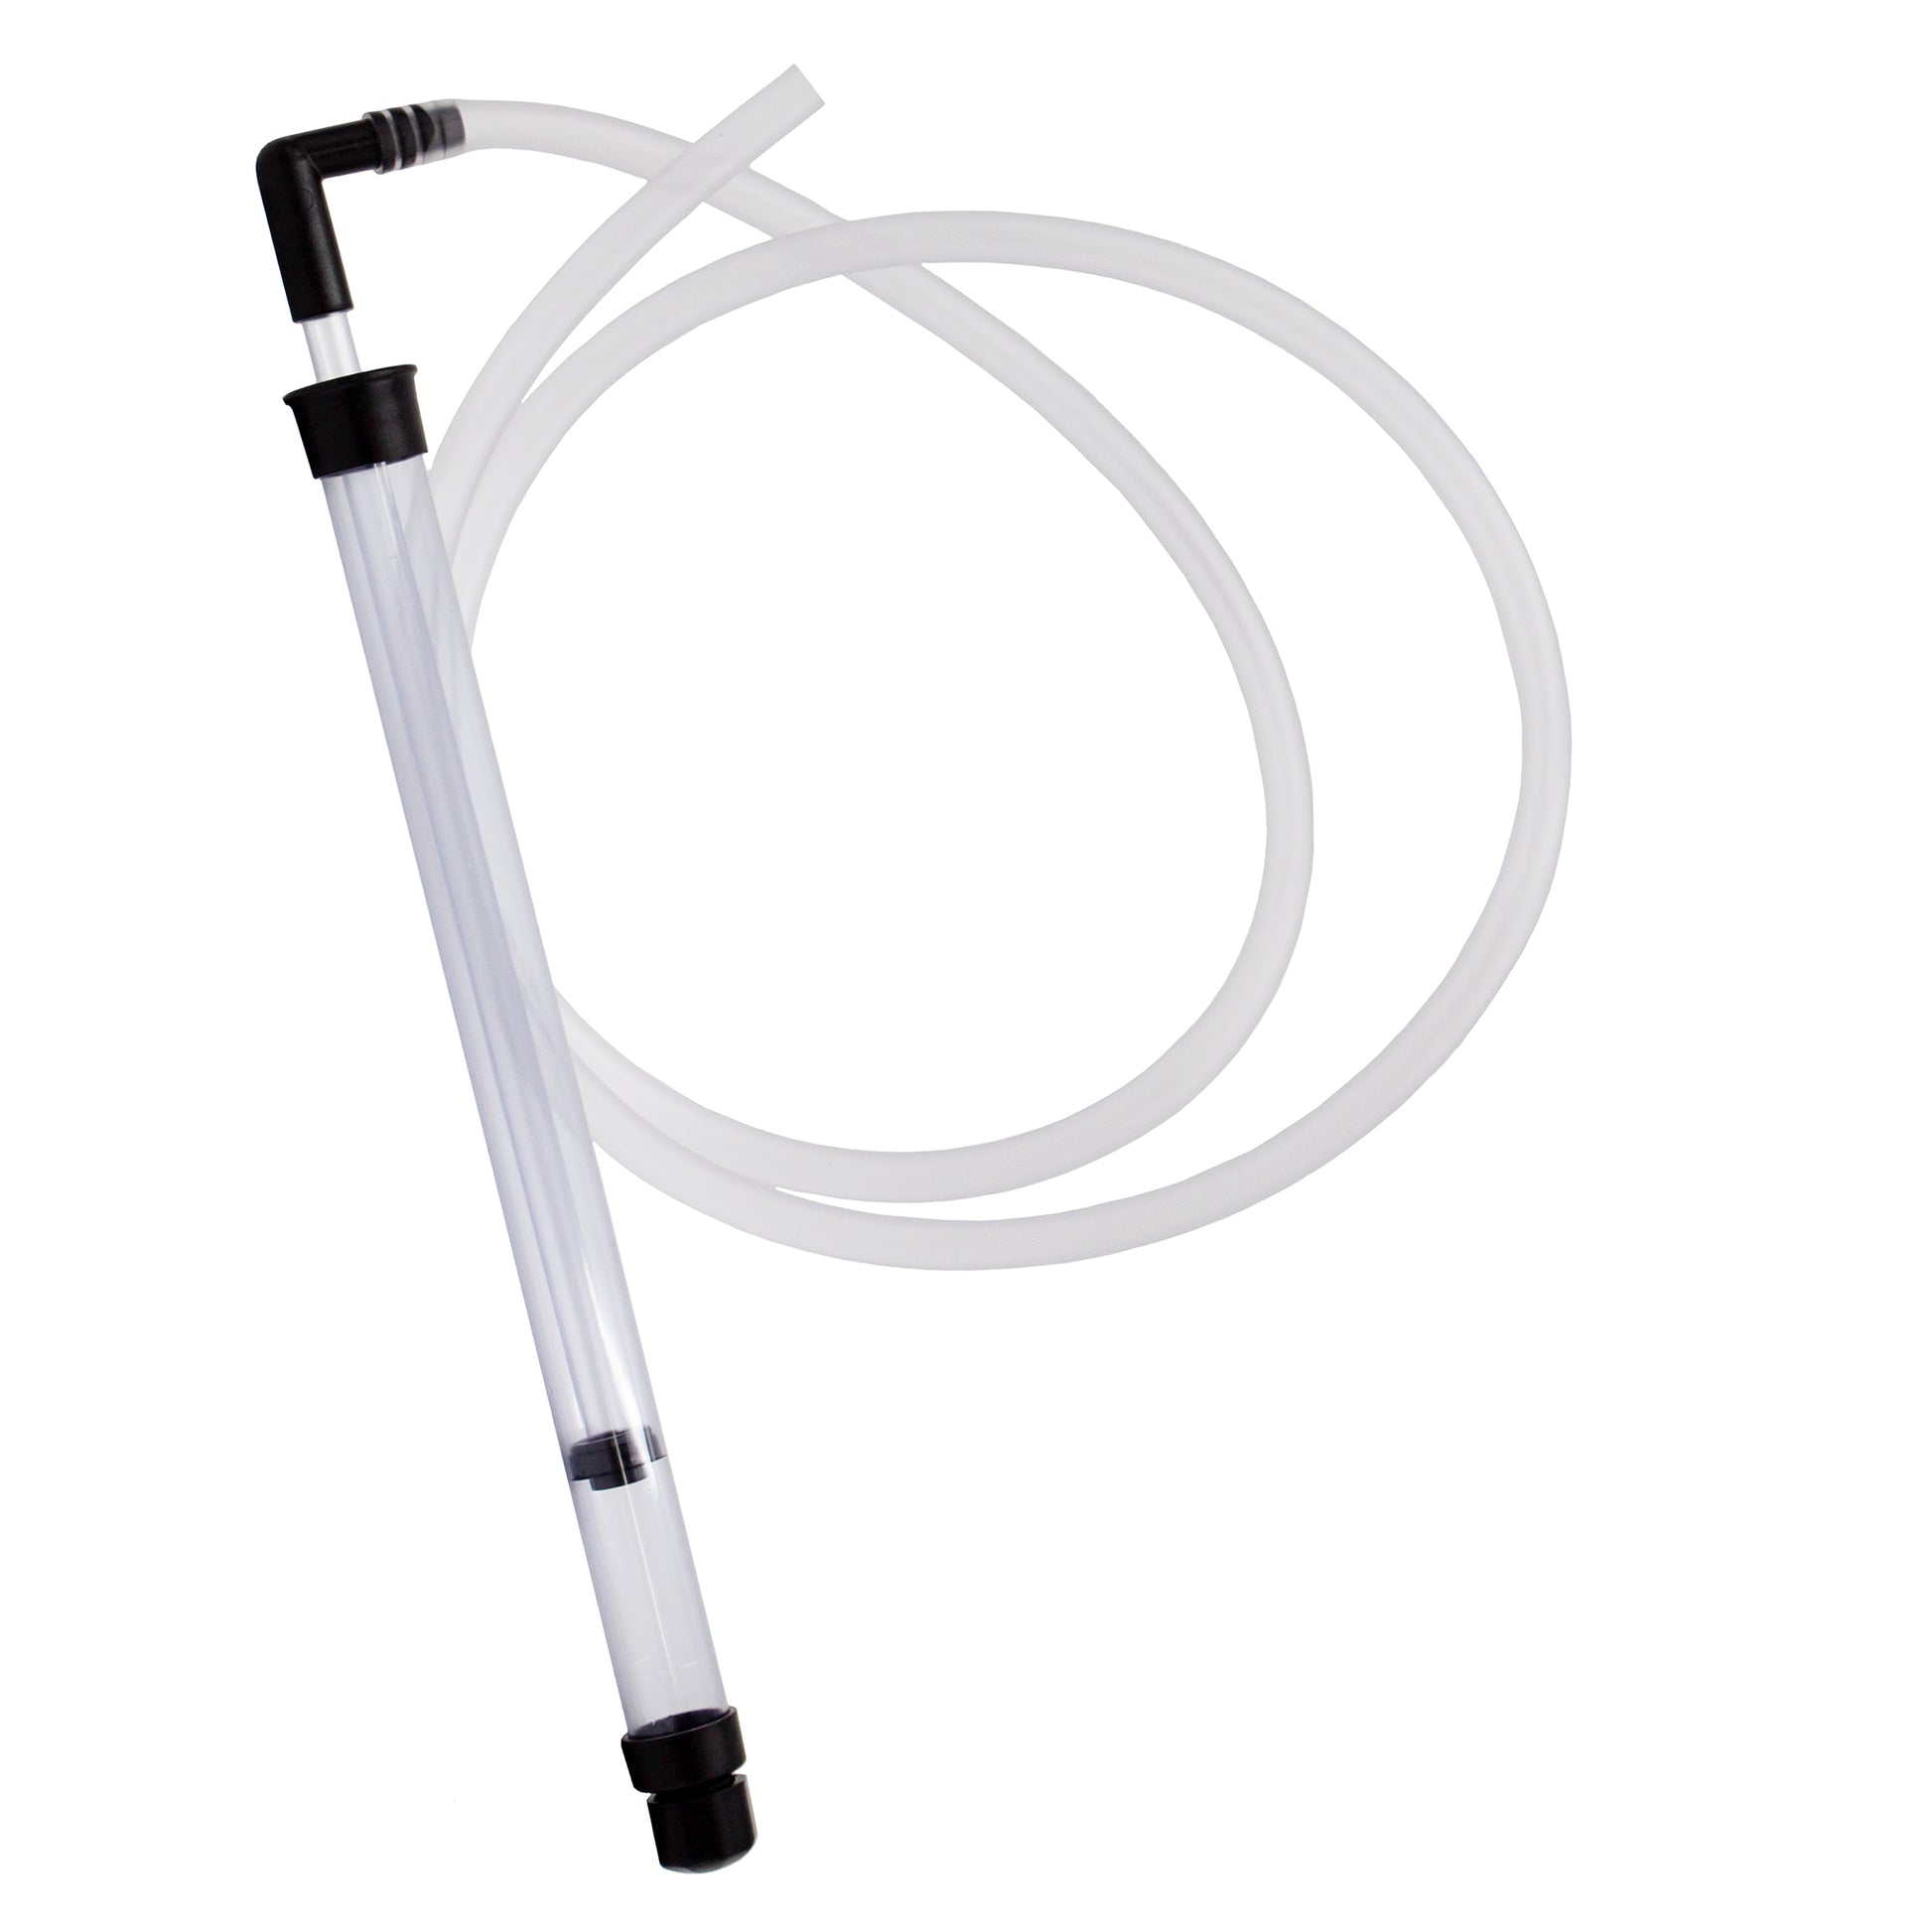 62cm long plastic syphon used in home brewing